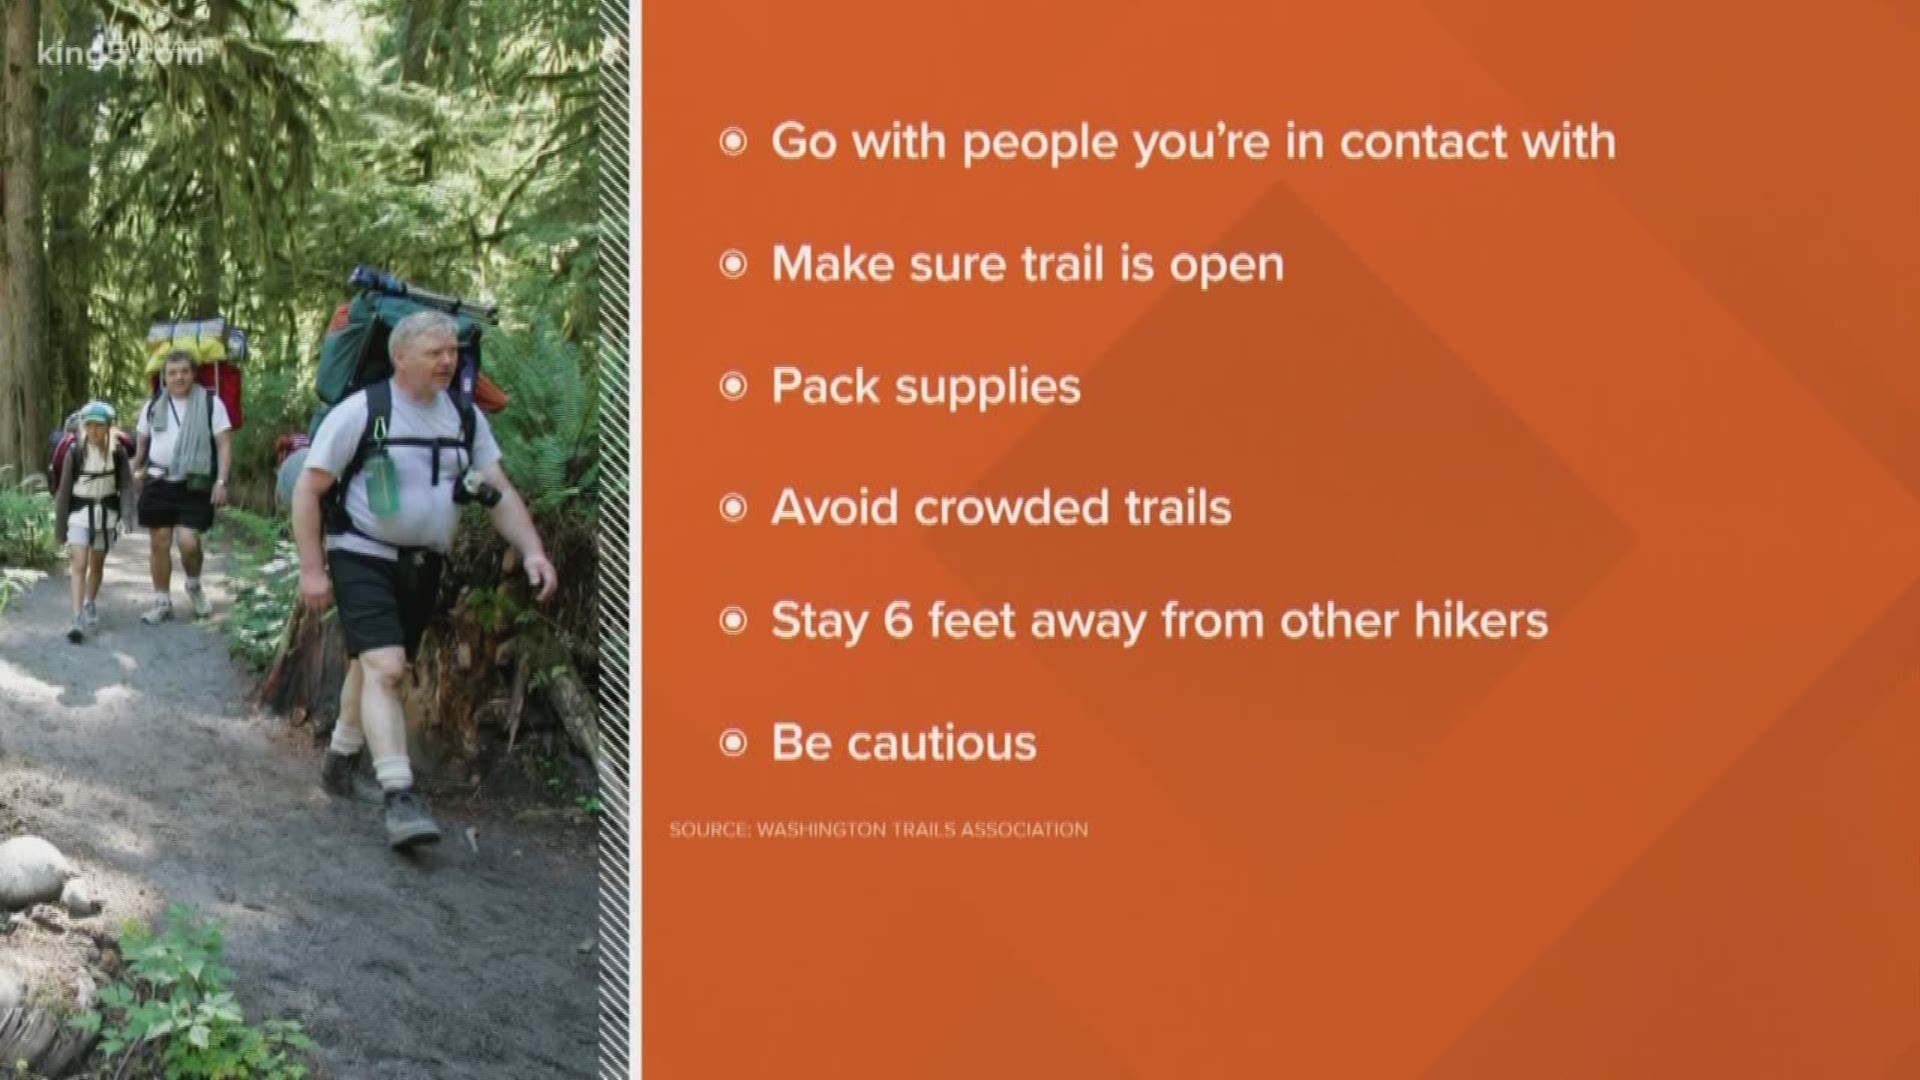 Tips For Hiking Responsibly During The Coronavirus Pandemic